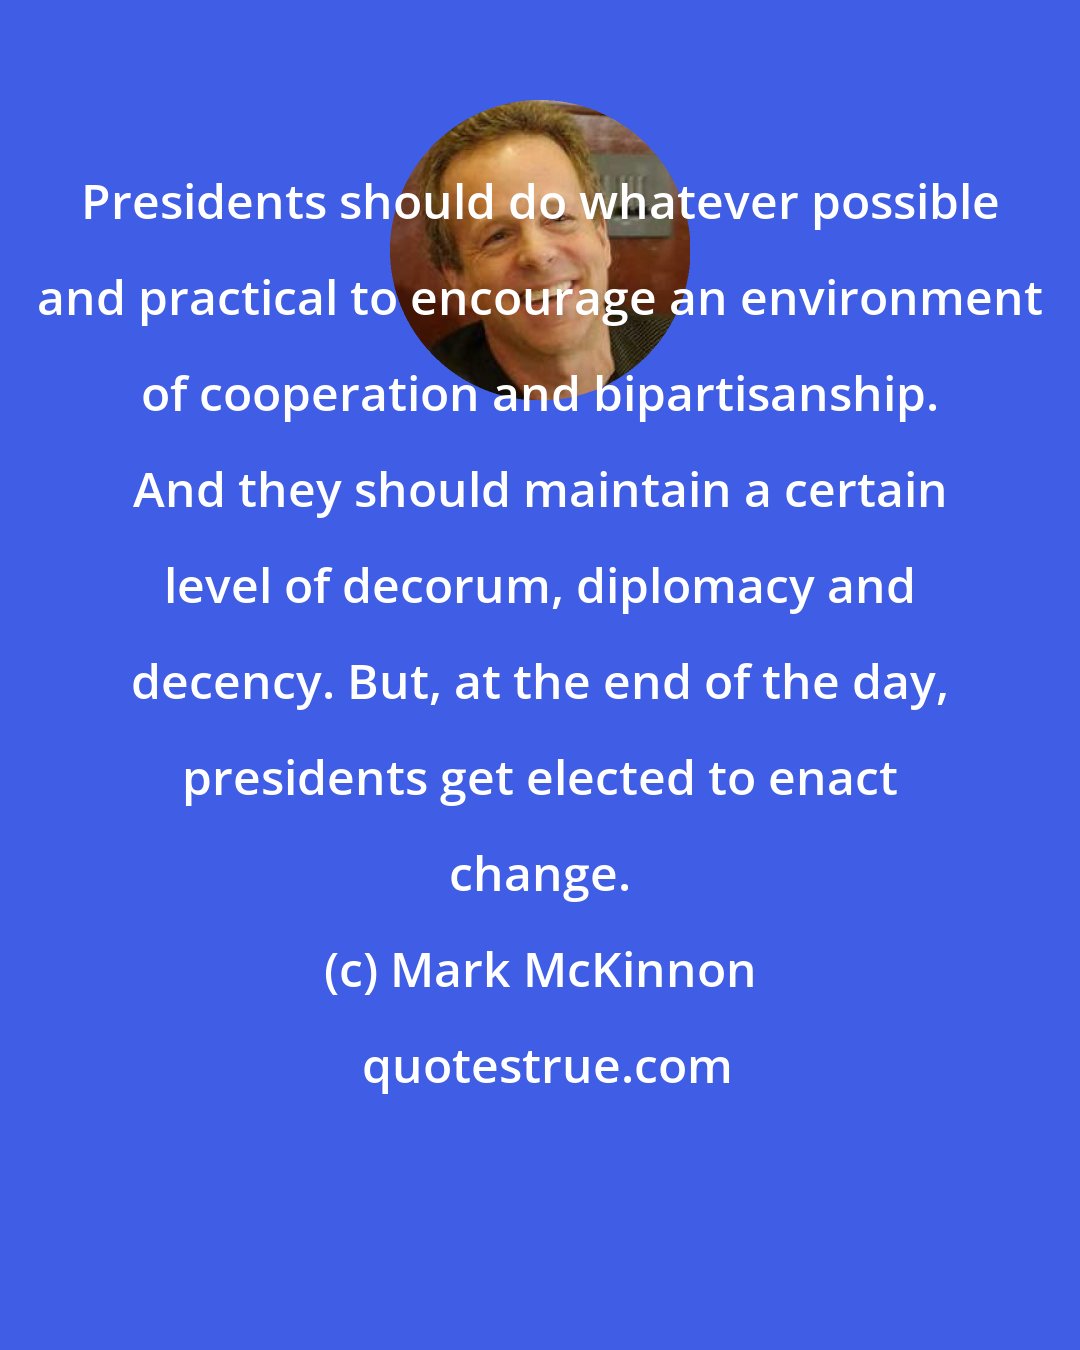 Mark McKinnon: Presidents should do whatever possible and practical to encourage an environment of cooperation and bipartisanship. And they should maintain a certain level of decorum, diplomacy and decency. But, at the end of the day, presidents get elected to enact change.